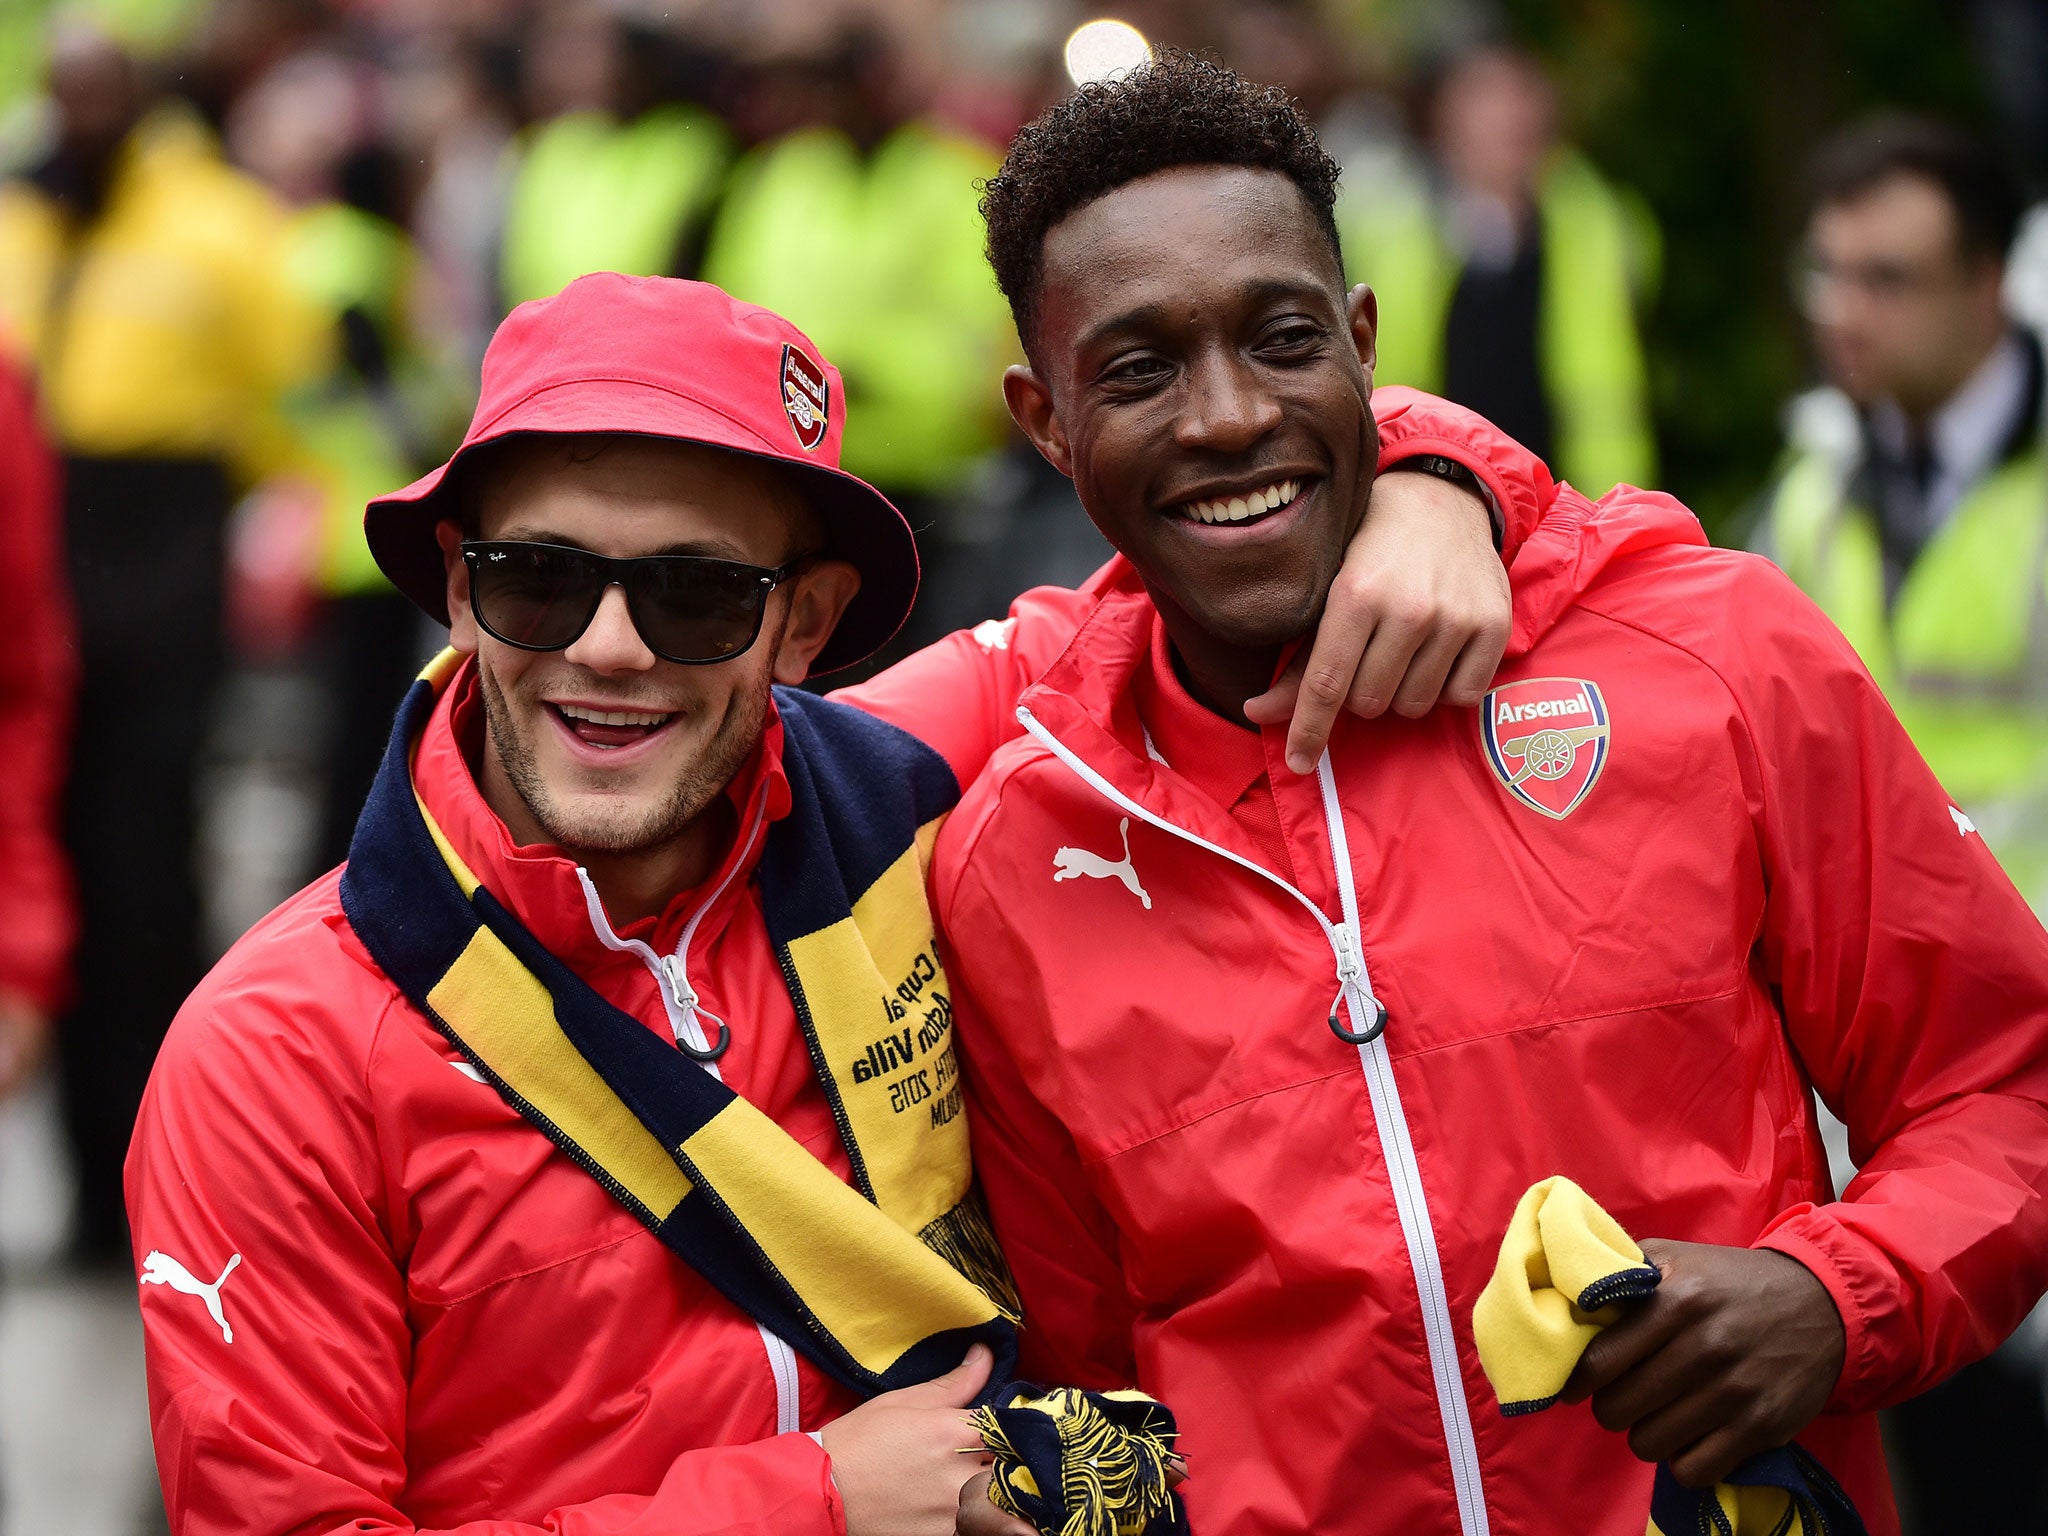 Jack Wilshere and Danny Welbeck on the Arsenal parade